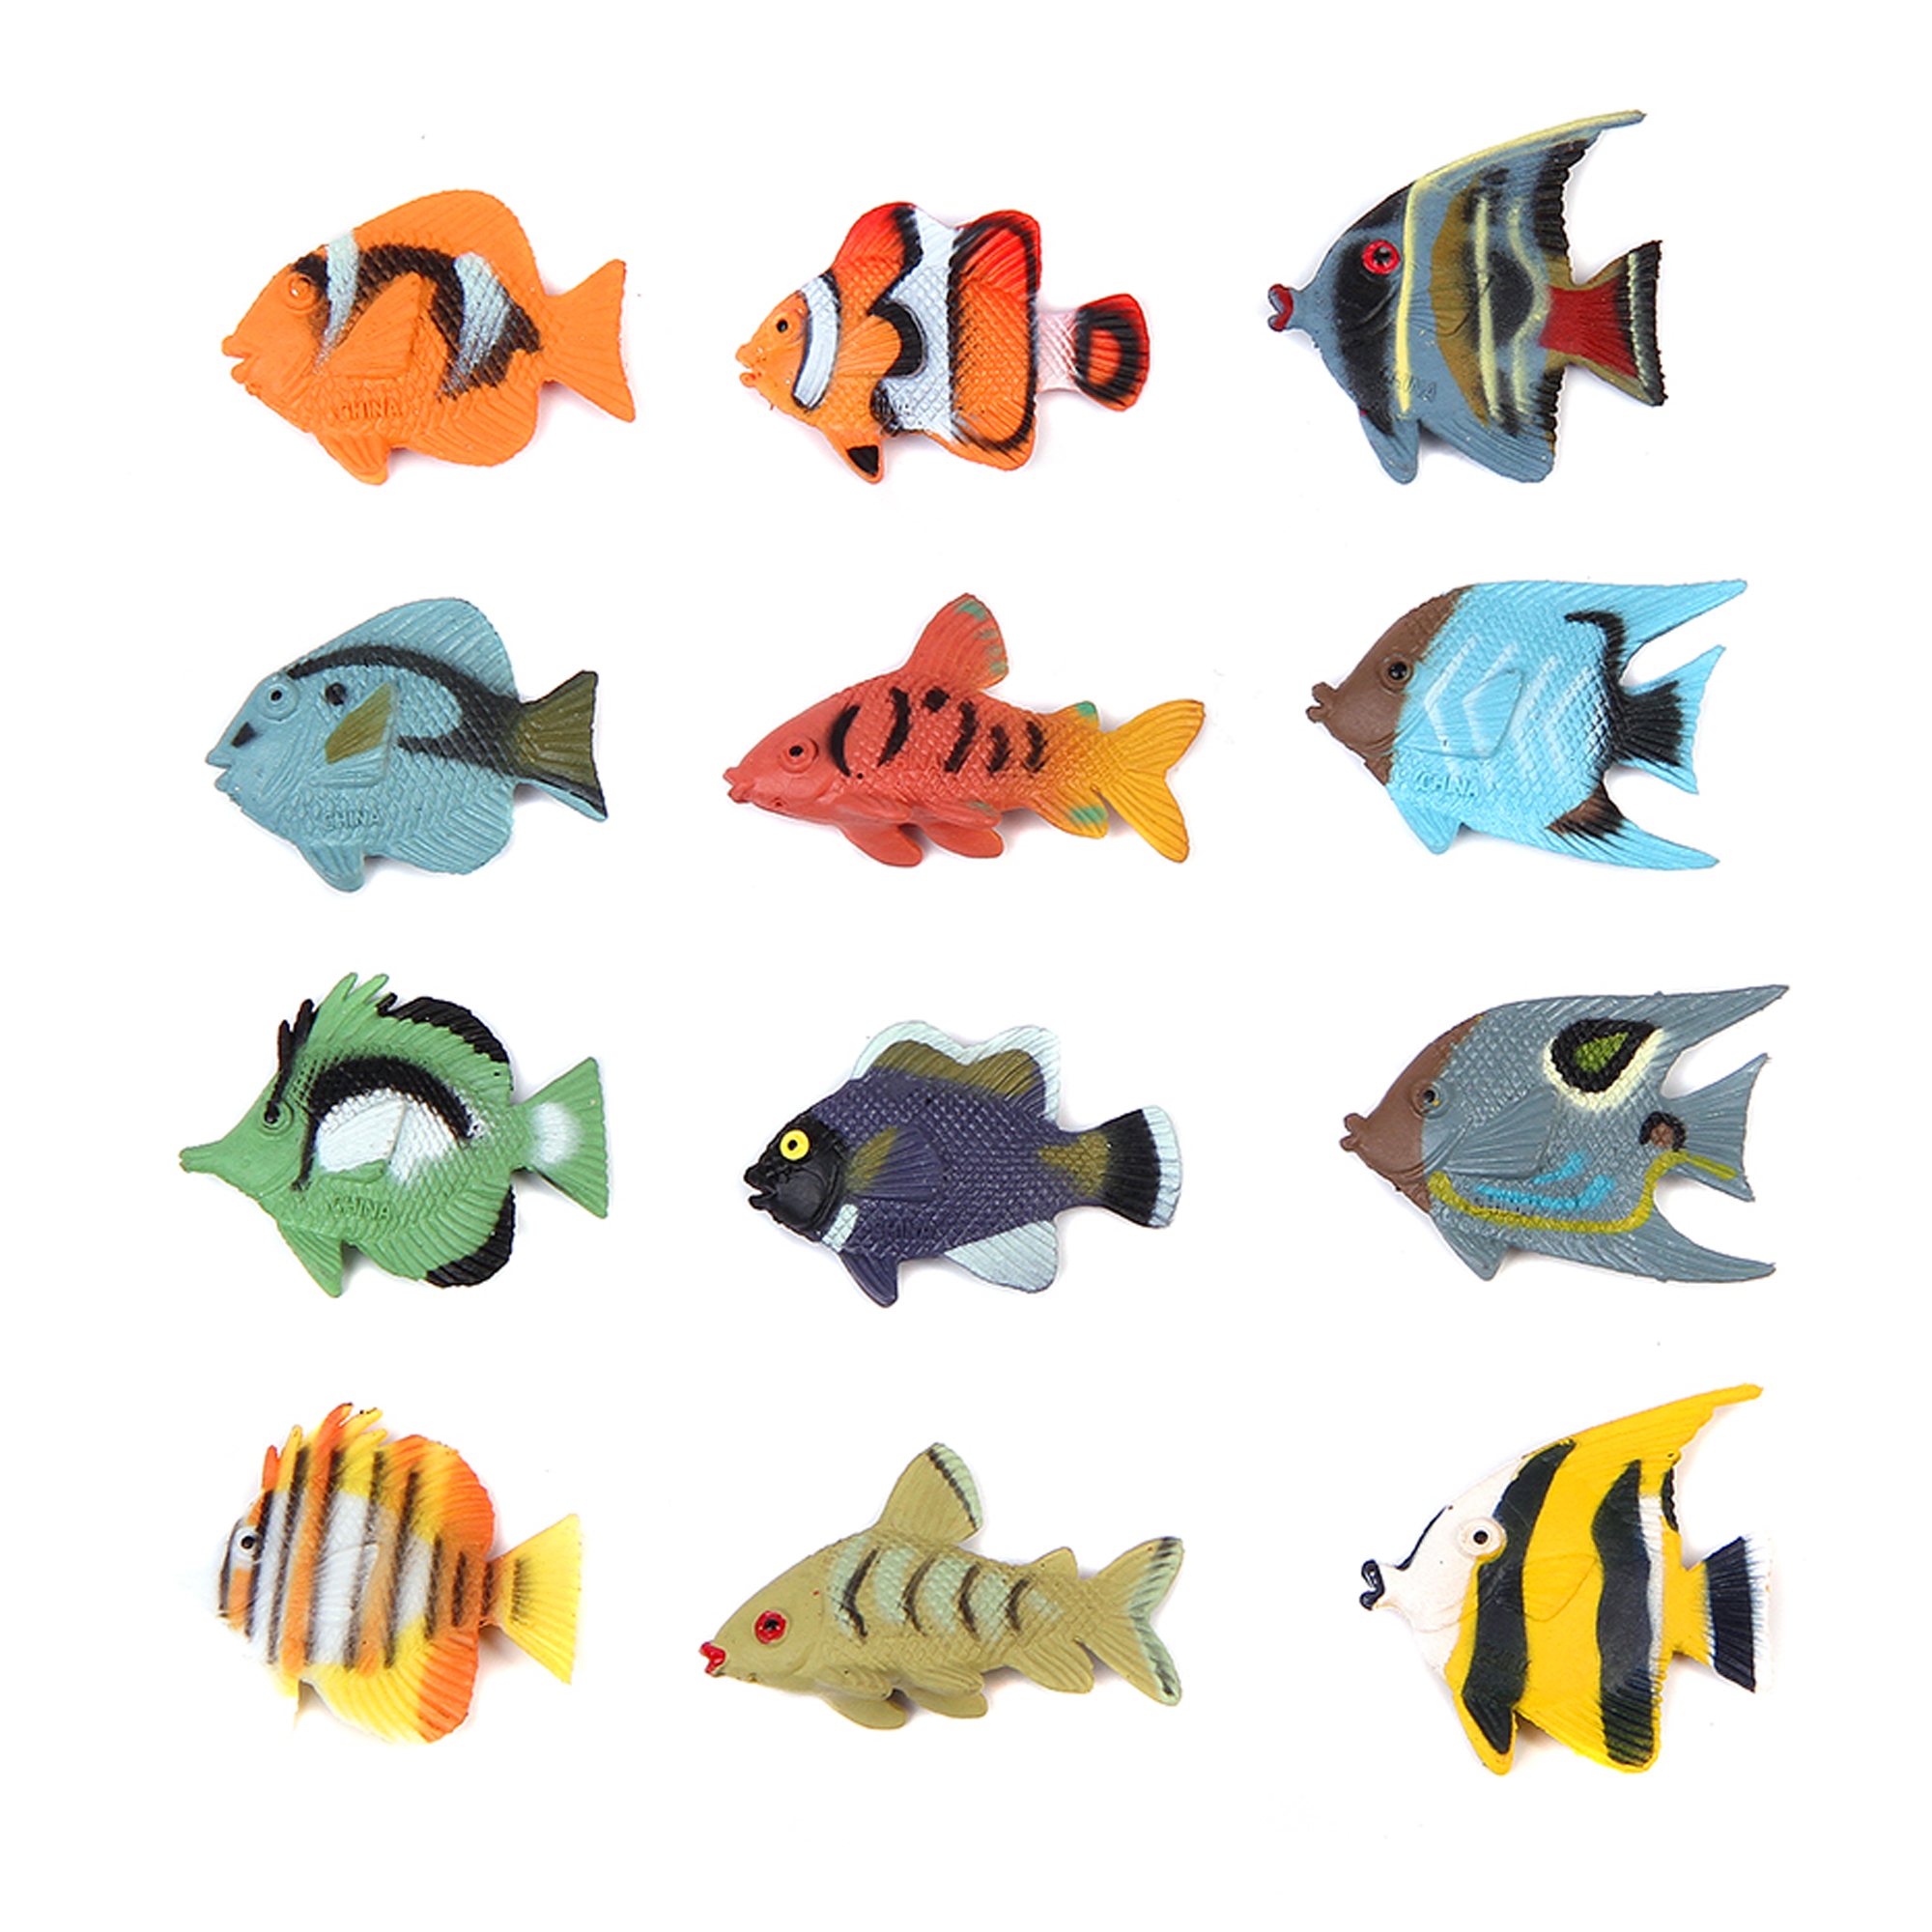 Tropical Fish Toy Figures